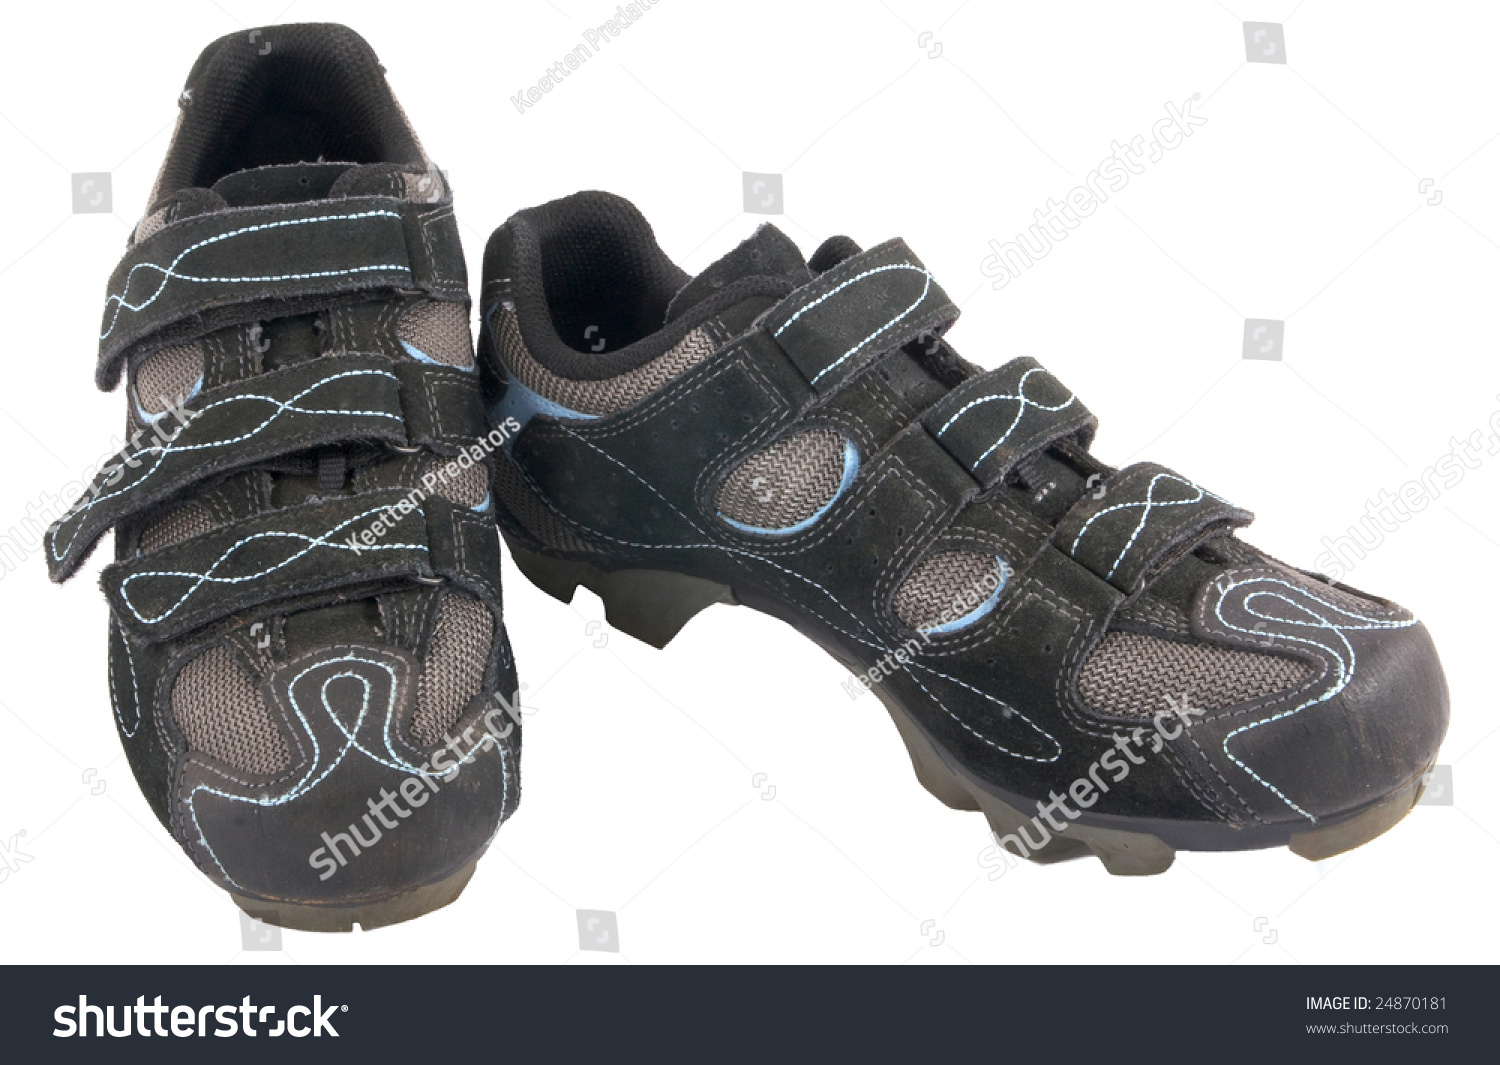 velcro cycling shoes